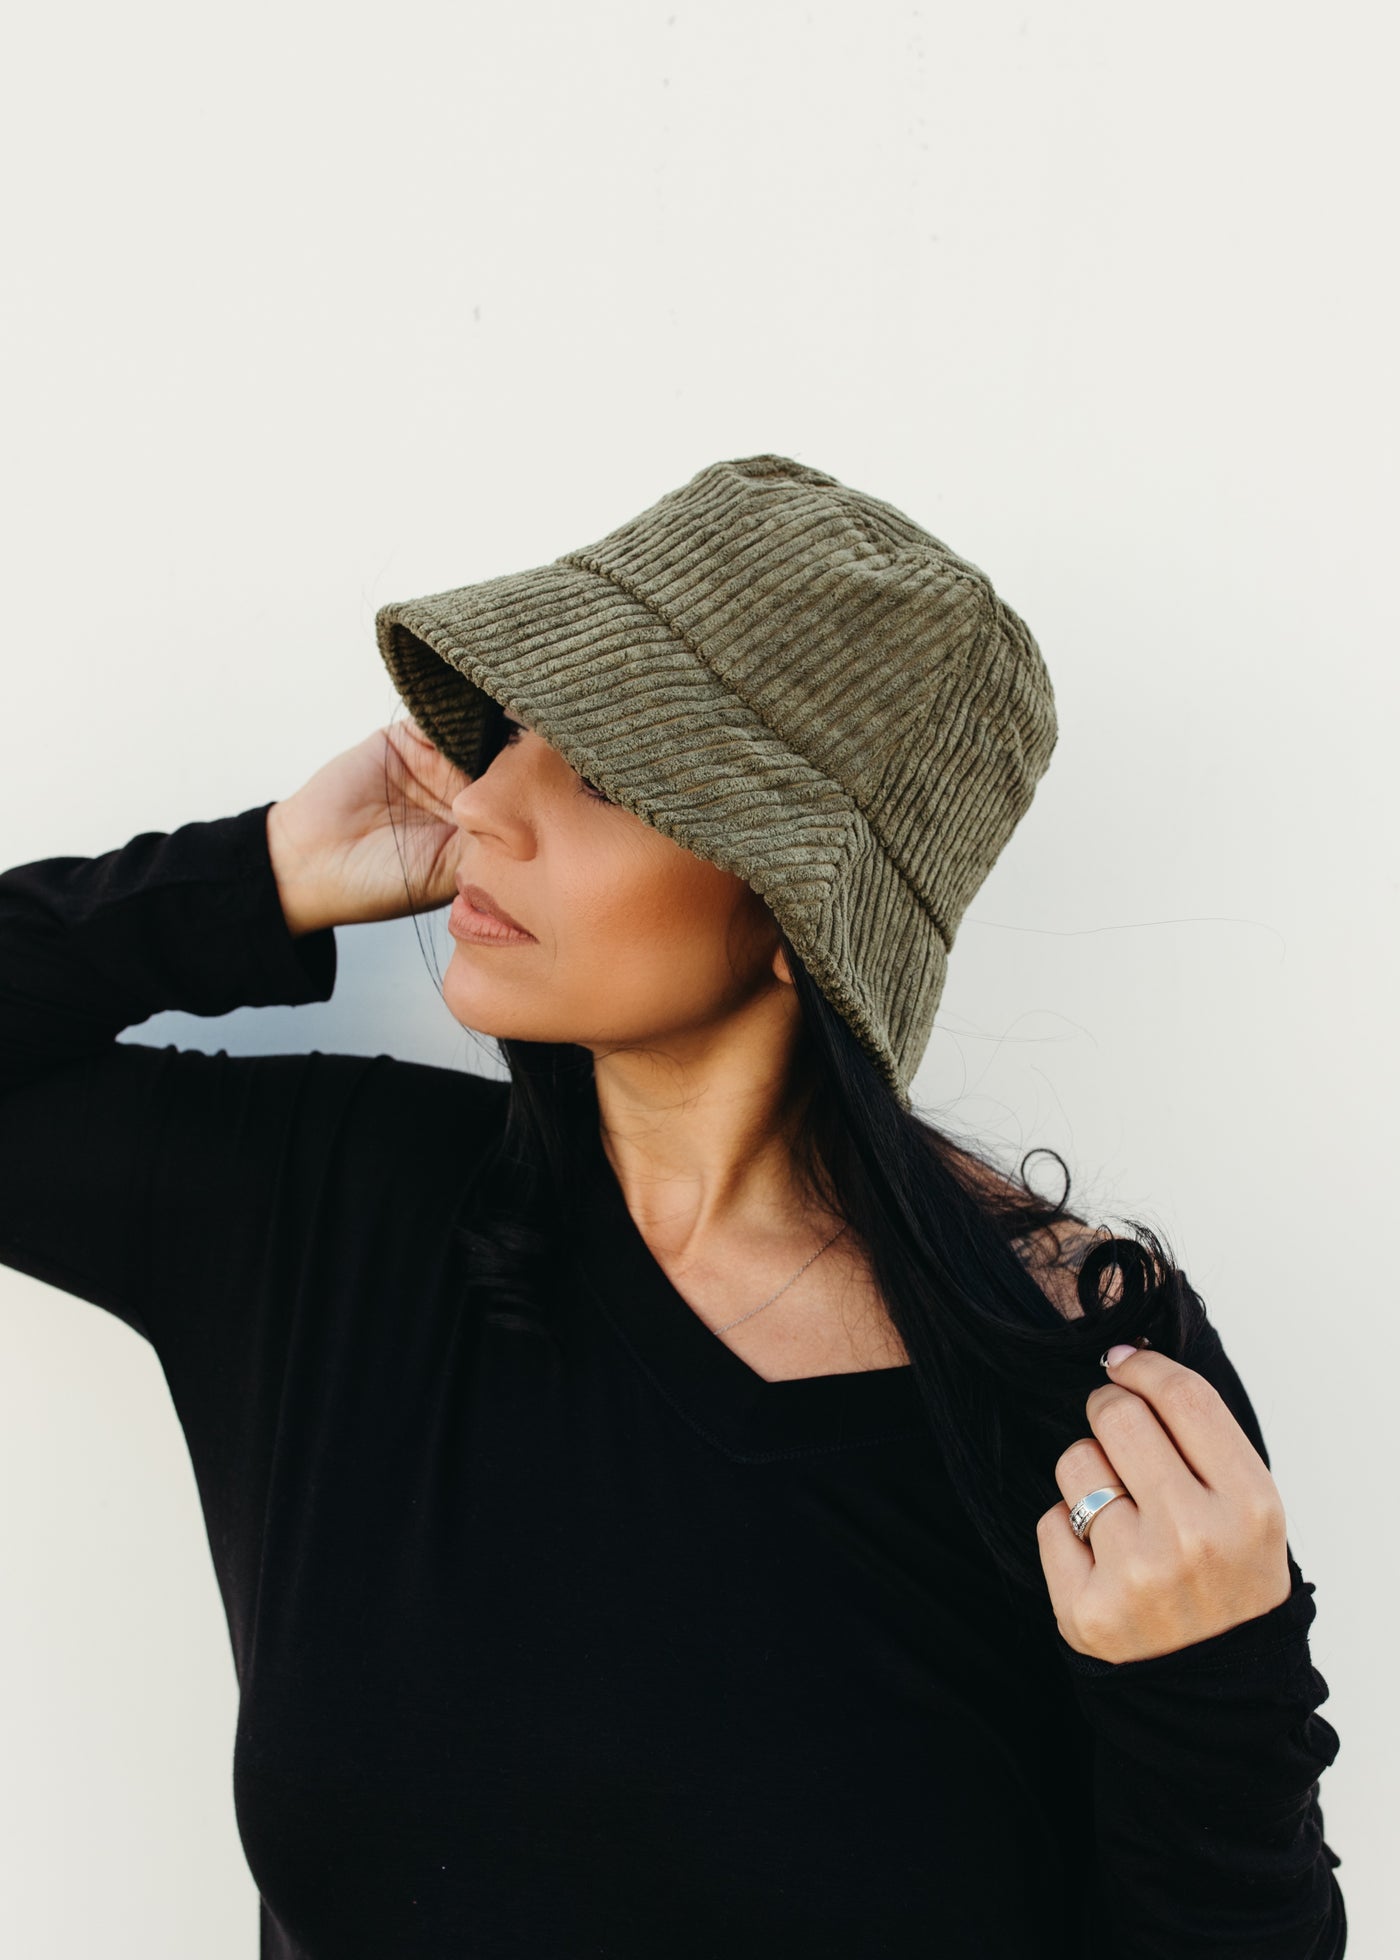 Fall For Me - Corduroy Bucket Hat